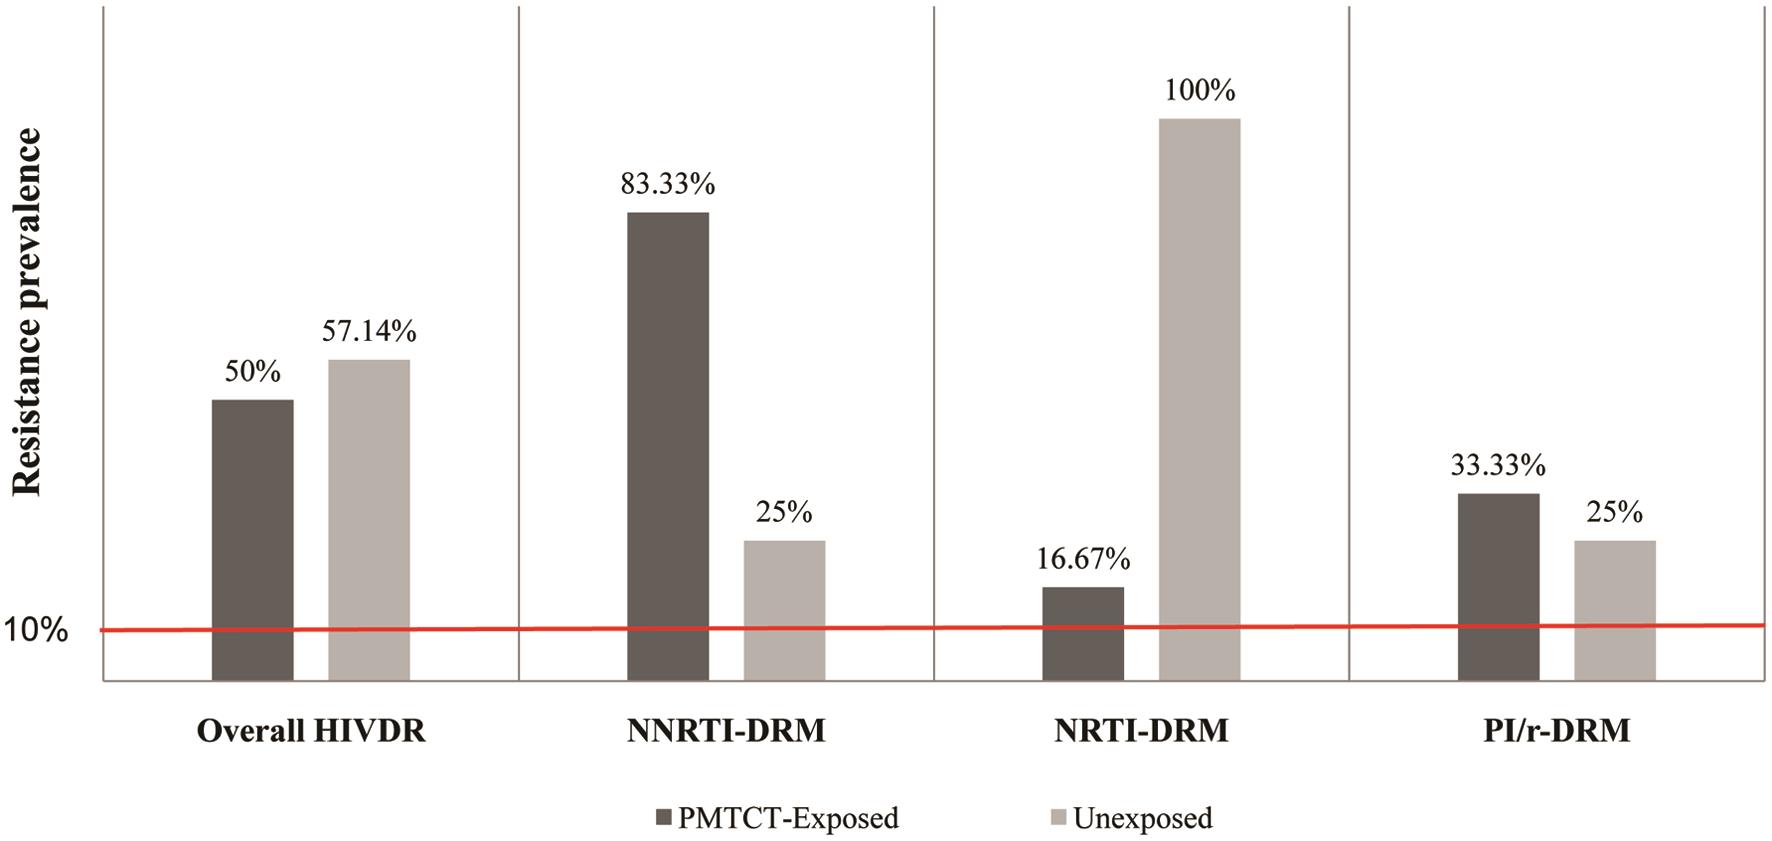 Distribution of pre-treatment HIV drug resistance according to PMTCT-exposure.